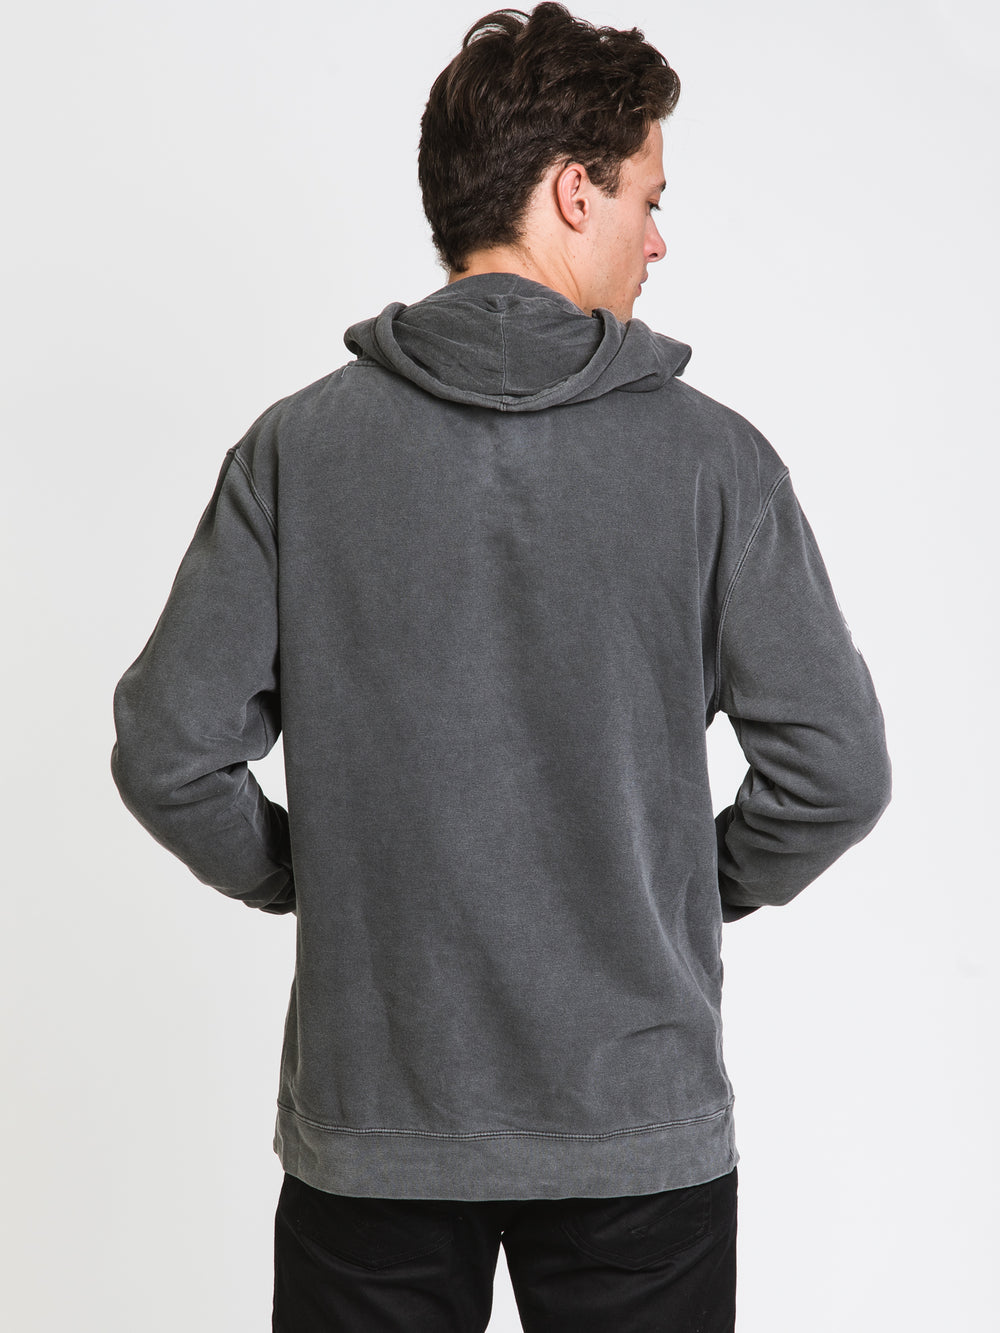 SALTY CREW PATCHY OVERDYED PULLOVER HOODIE - CLEARANCE